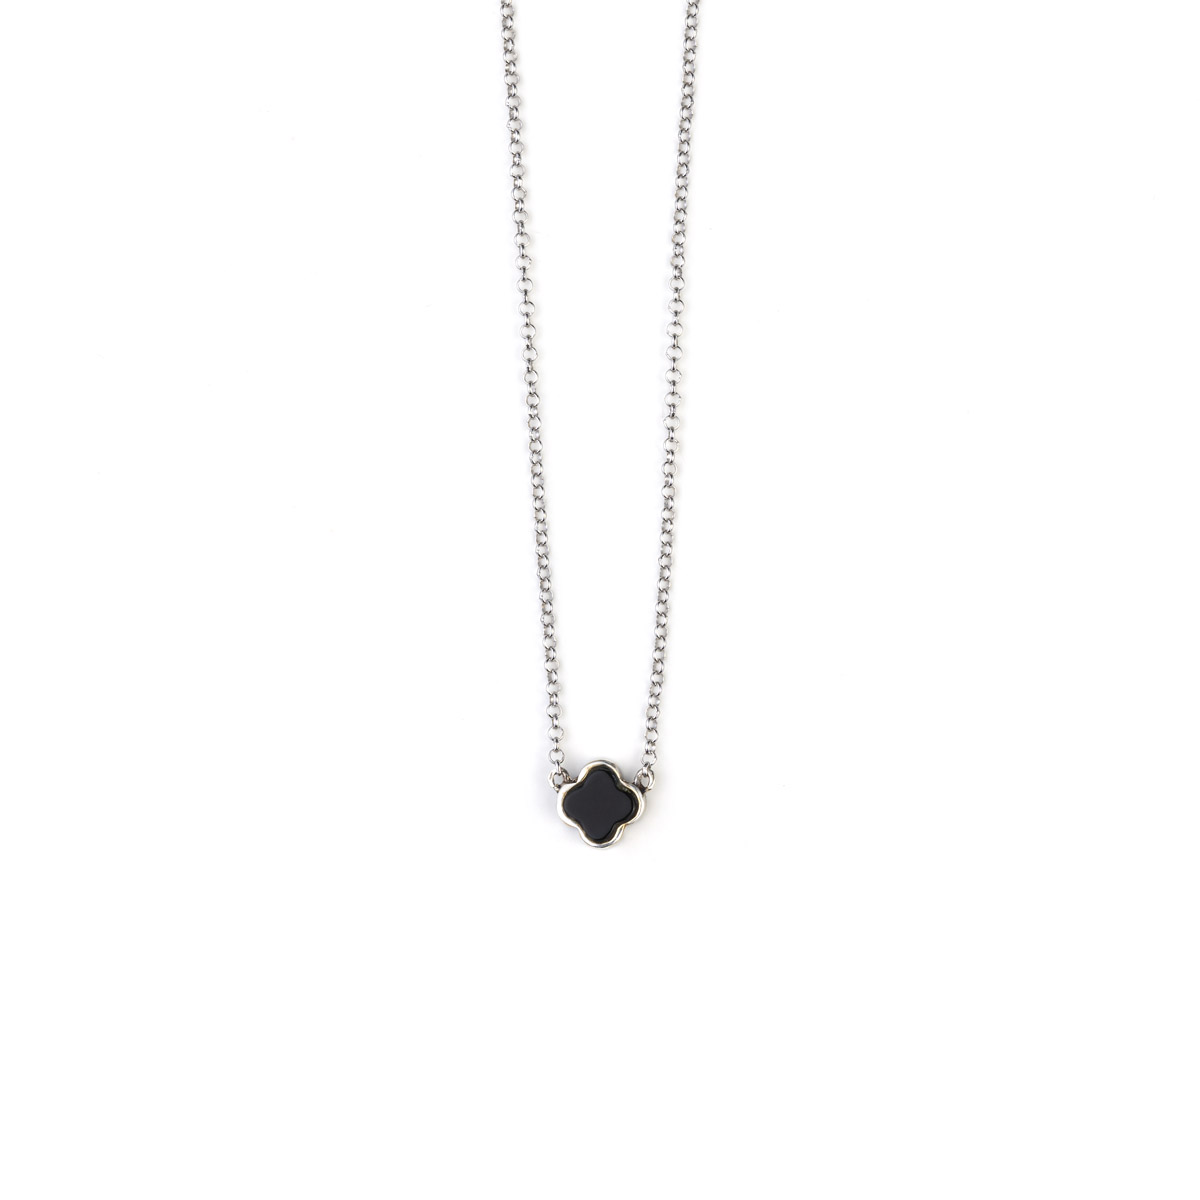 Black Clover Necklace with Zircon - Silver 925 - GREEK ROOTS